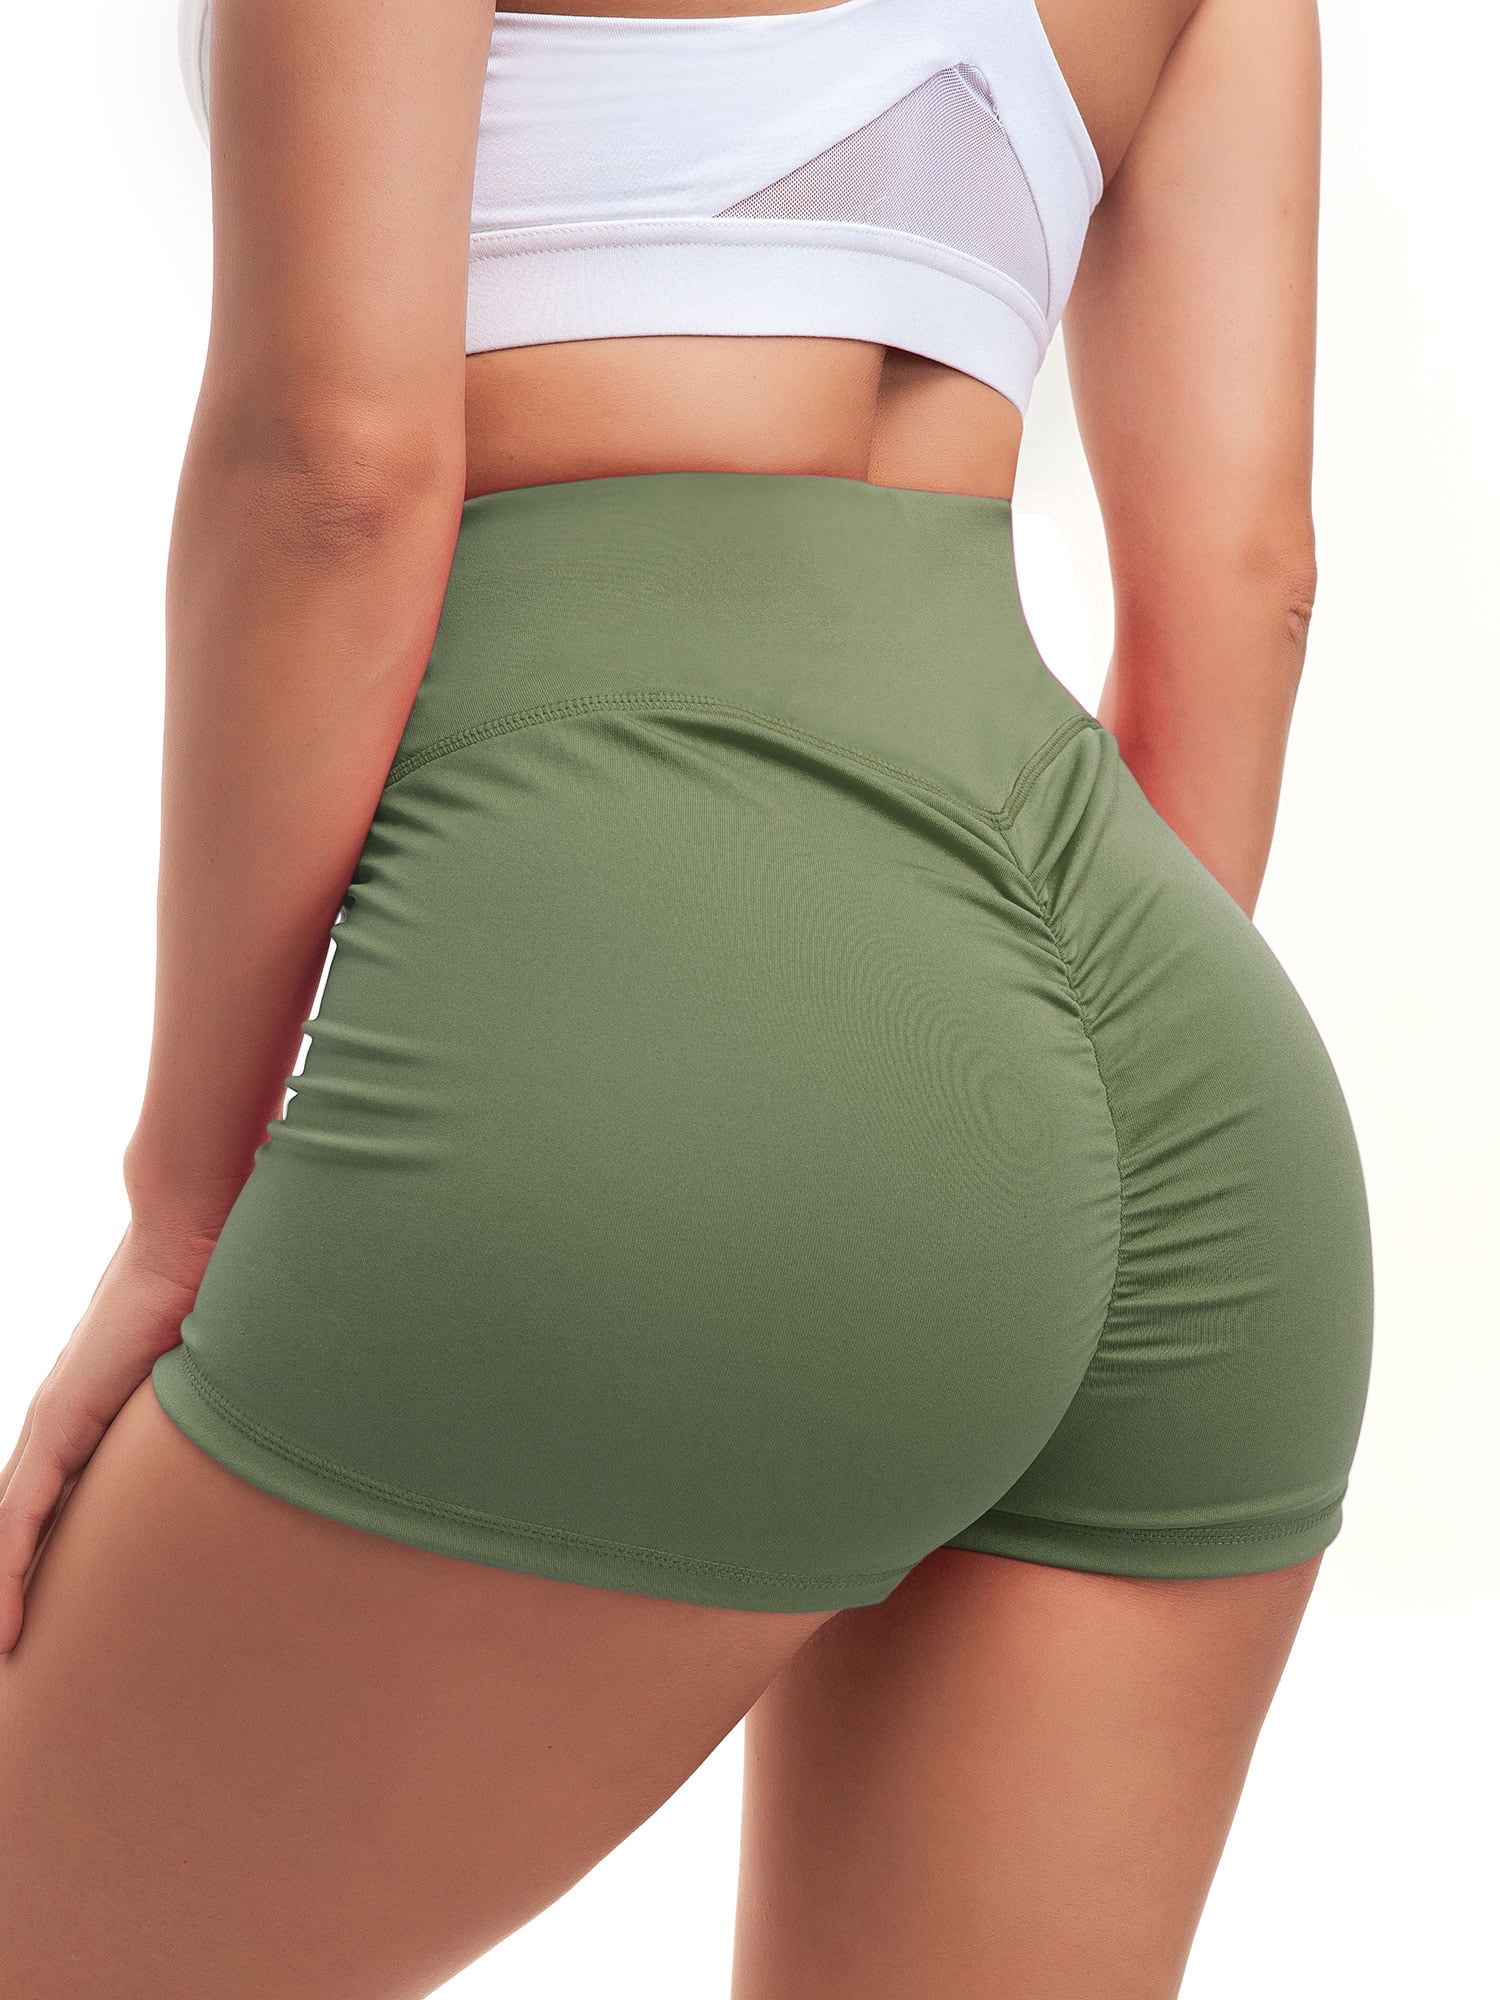 brian holzer recommends big ass in booty shorts pic